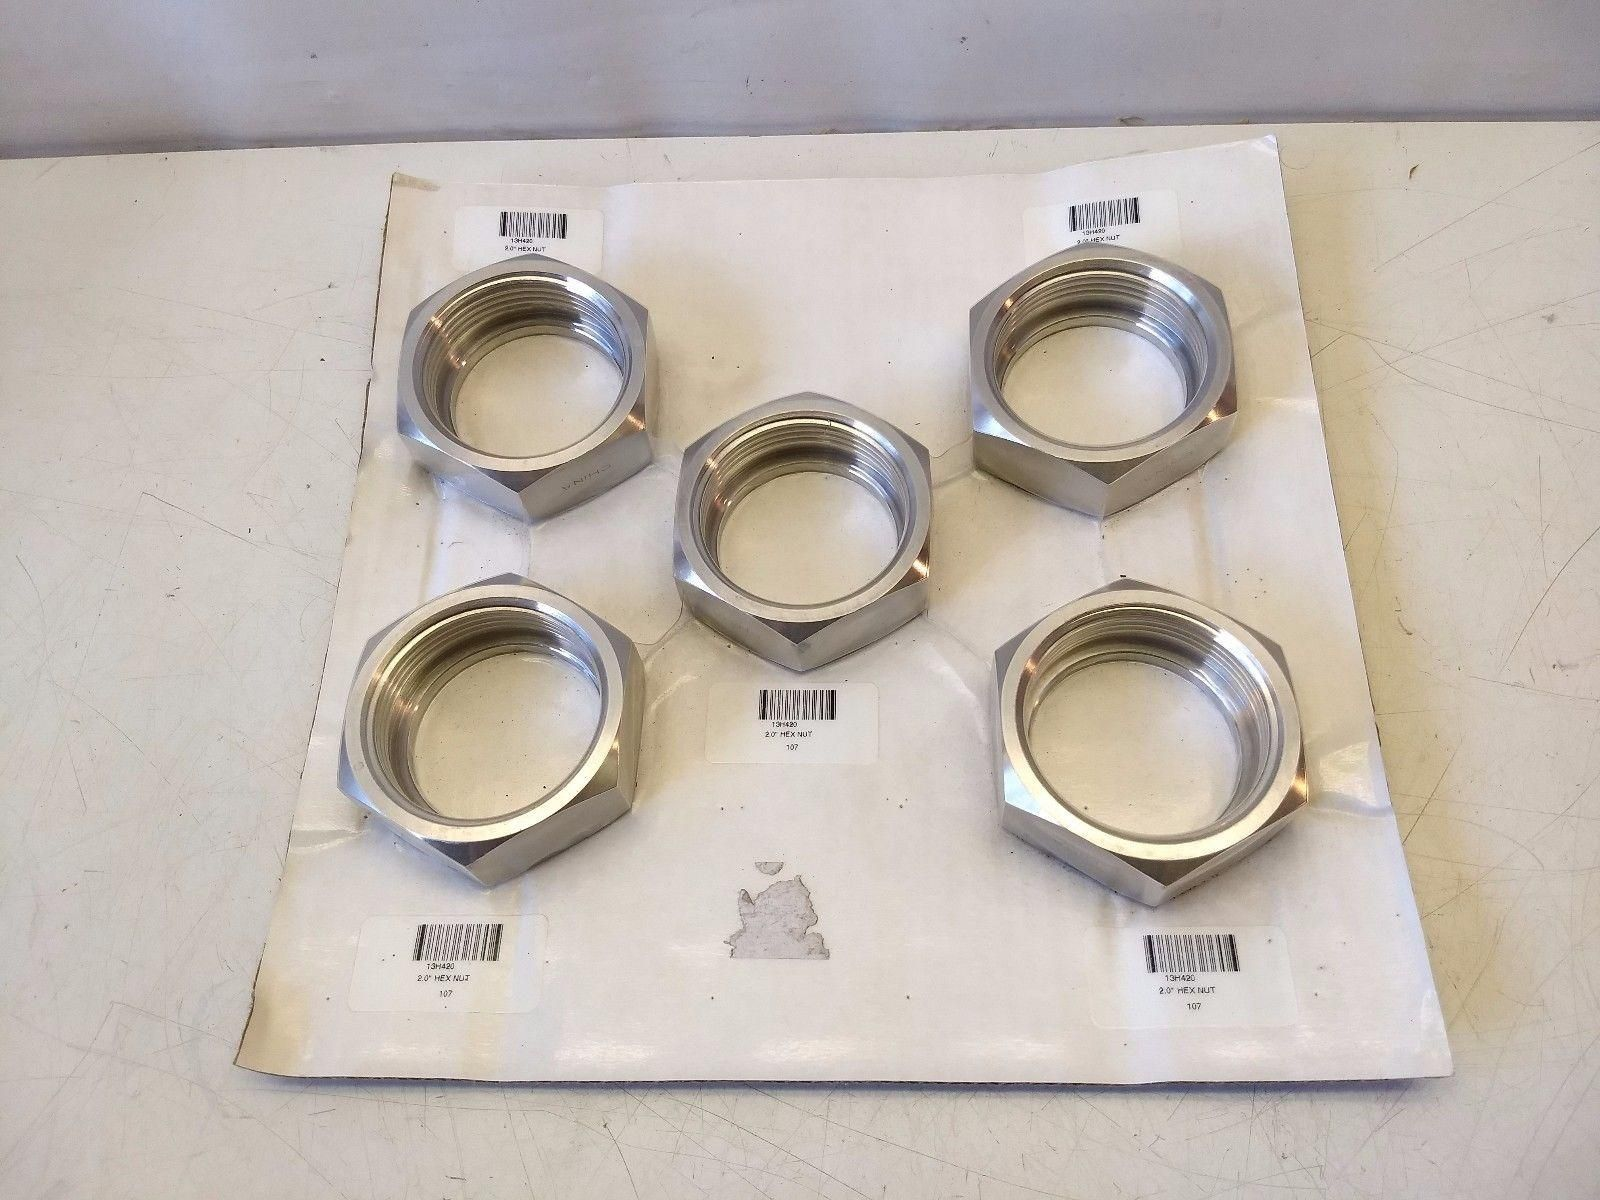 NEW: 5 Pcs Lot 2" Stainless Steel Hex Nuts 13H420